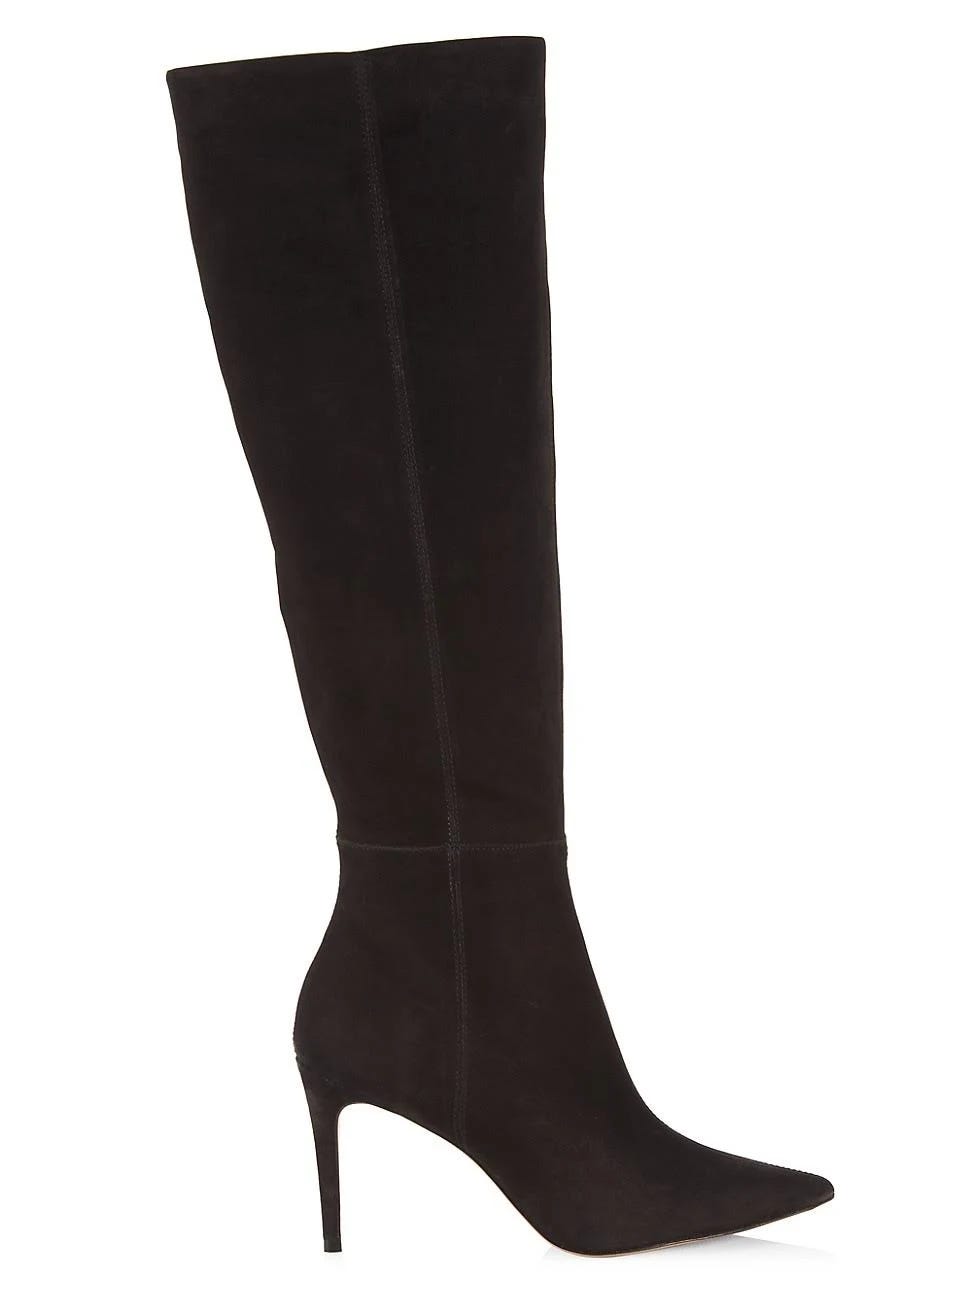 Saks Fifth Avenue Stiletto Knee-High Suede Boots - Black - Size 6.5 | Image